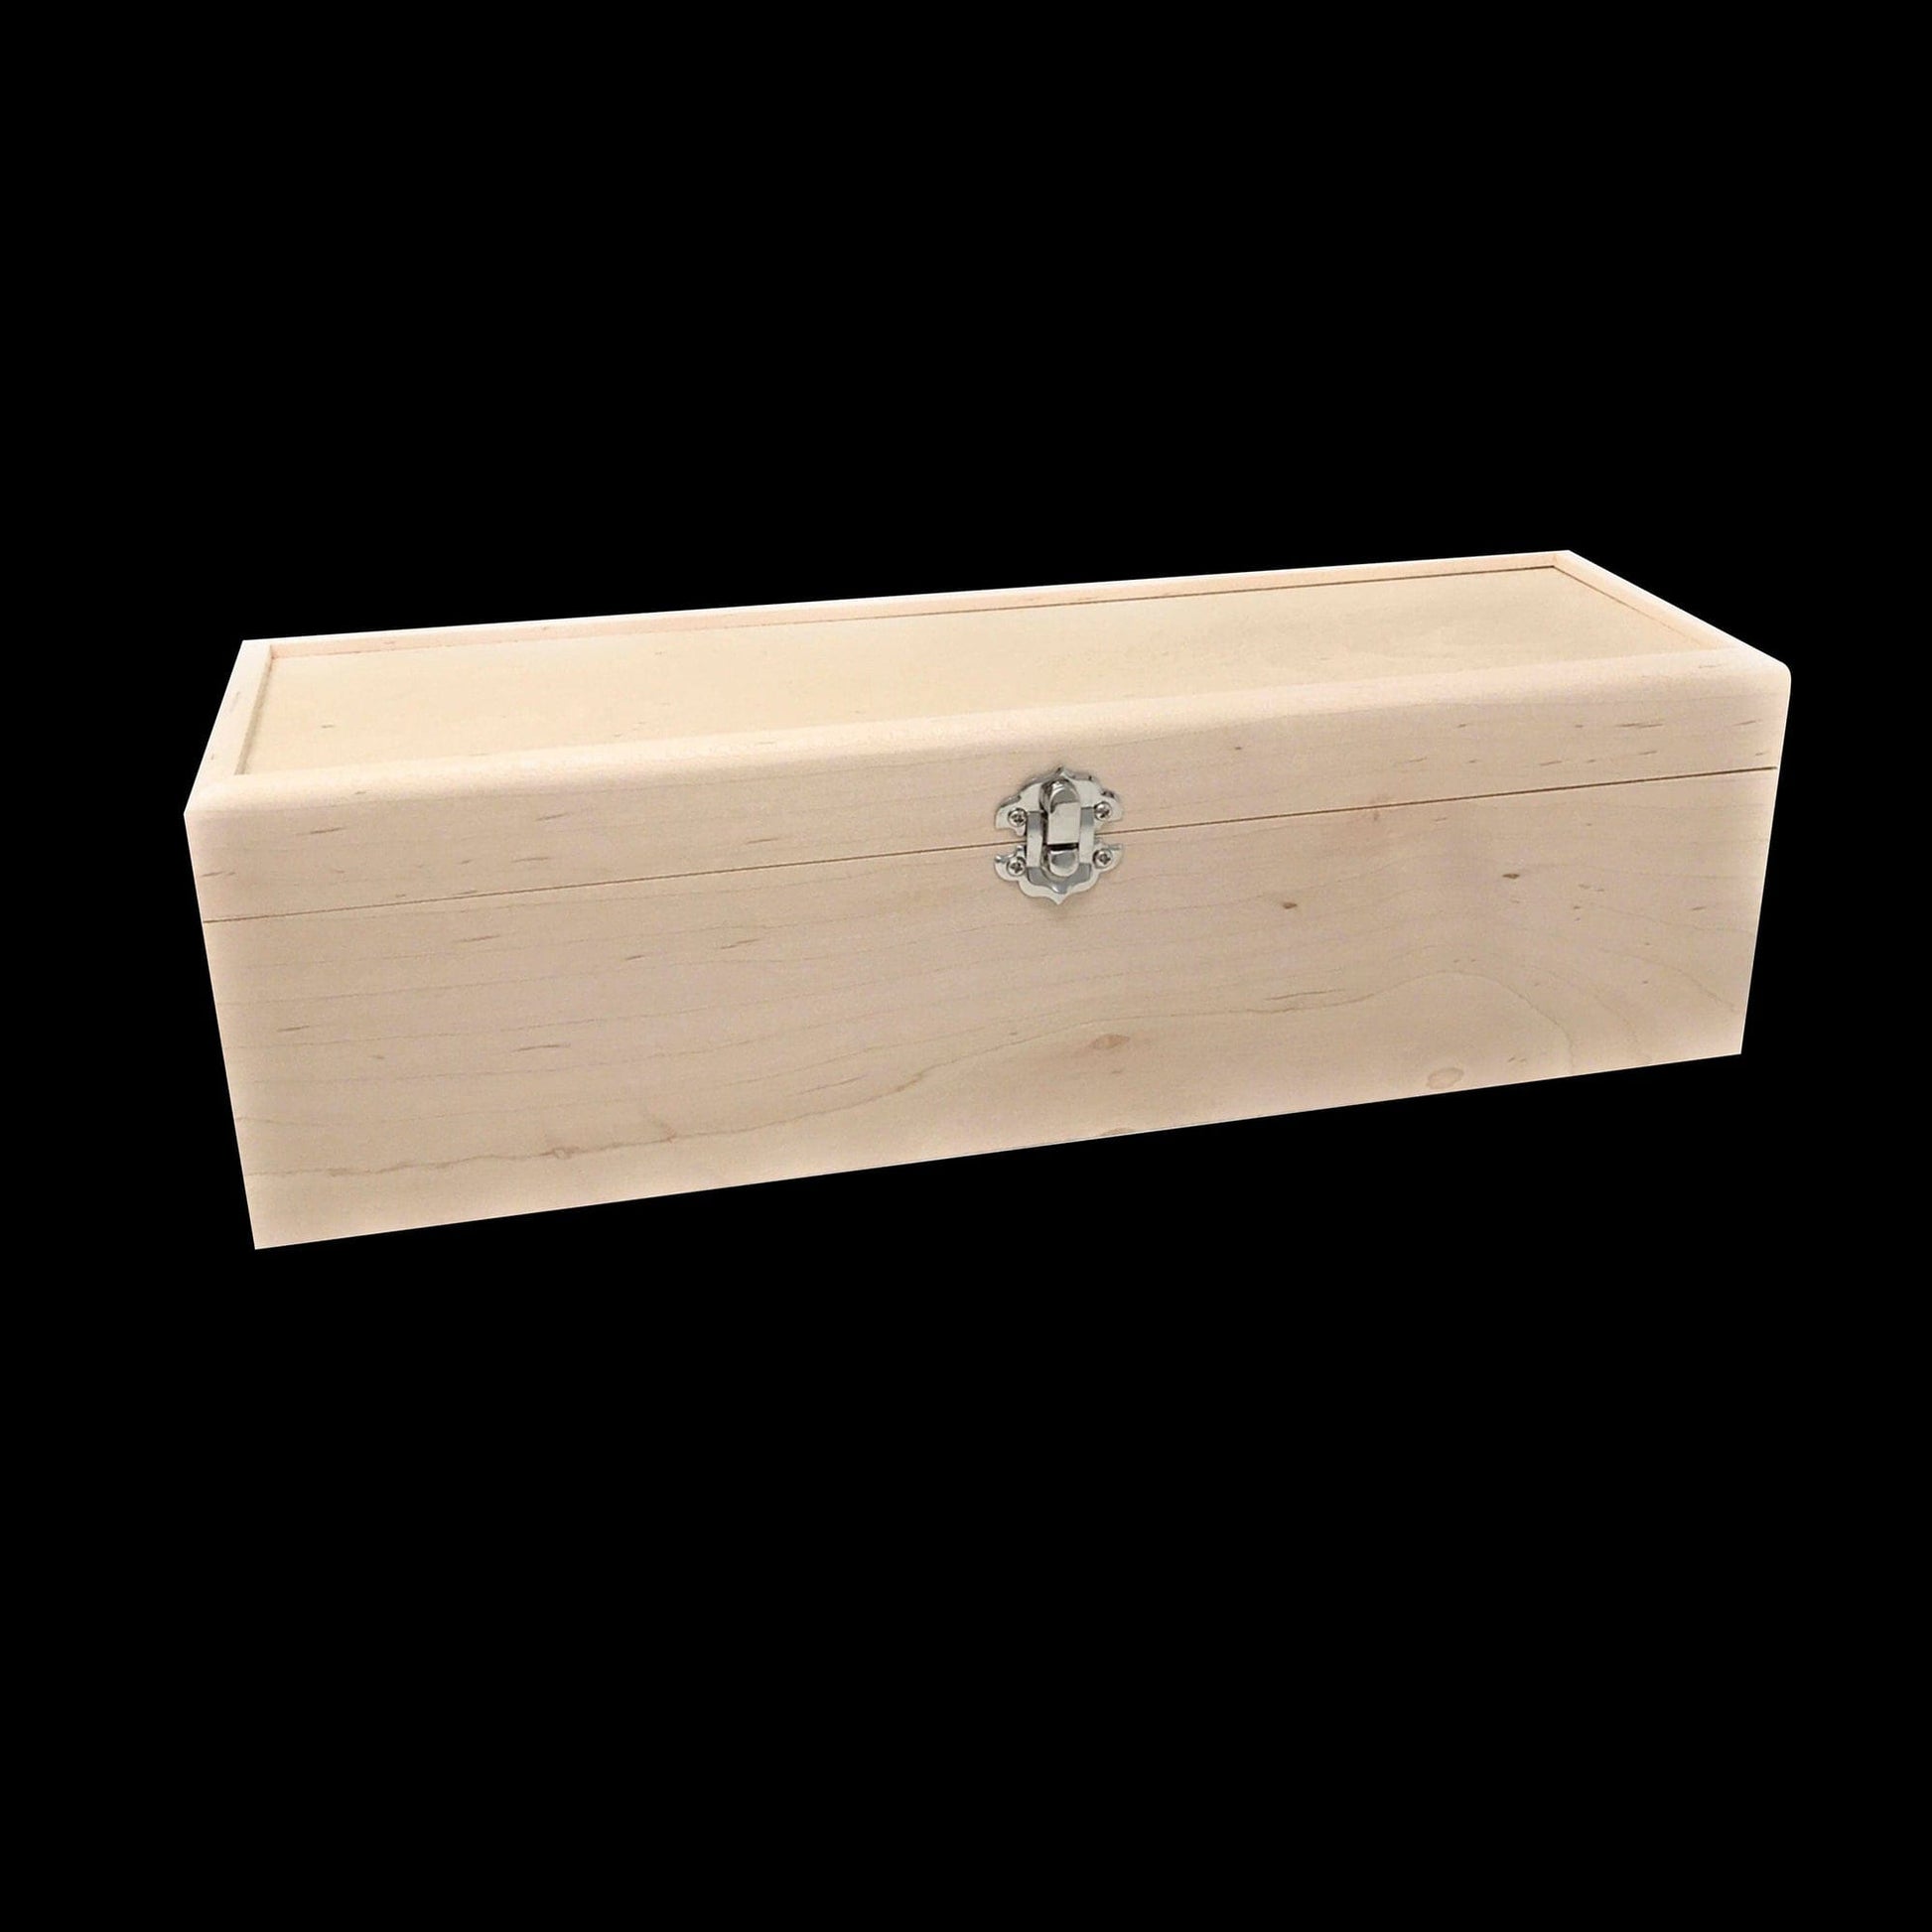 Unfinished Wood Box with Hinges and Latch 13 3/4 x 4 1/4 x 4 Engraving  Available – The Designcraft Studio